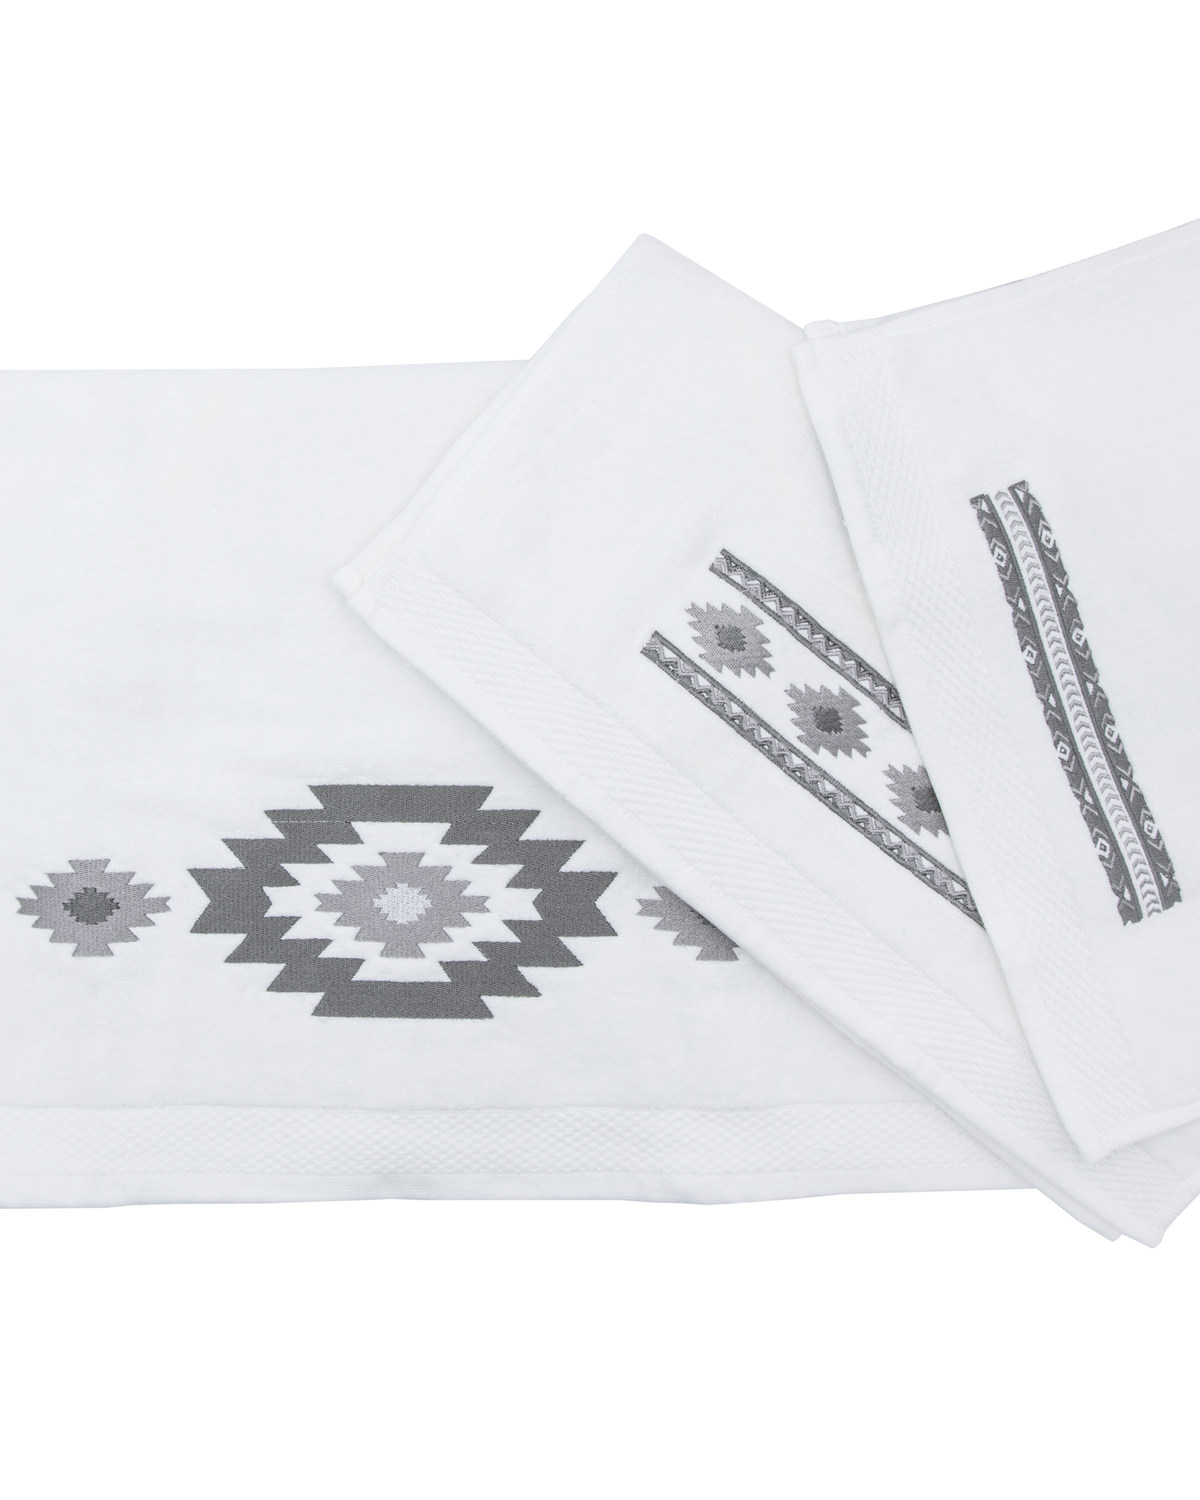 HiEnd Accents Free Spirit 3pc Embroidery Towel Set